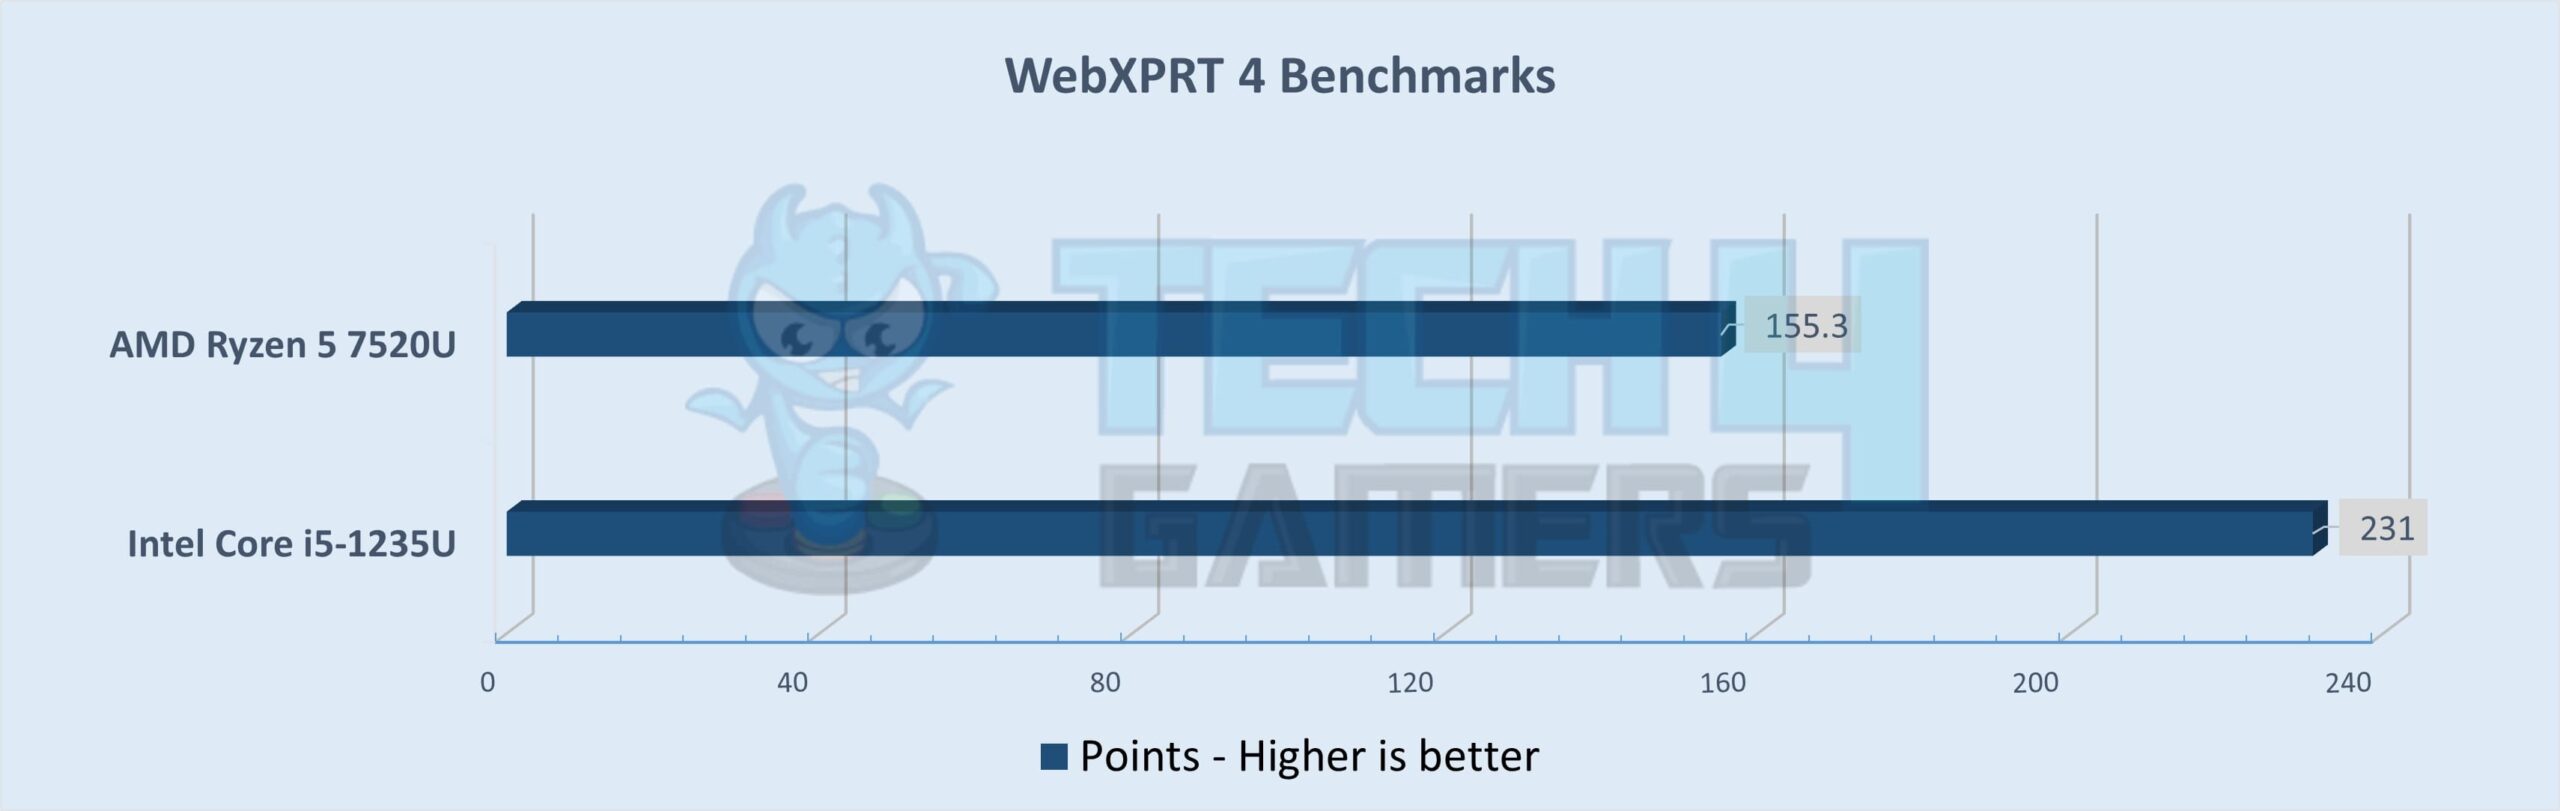 WebXPRT 4 Benchmarks